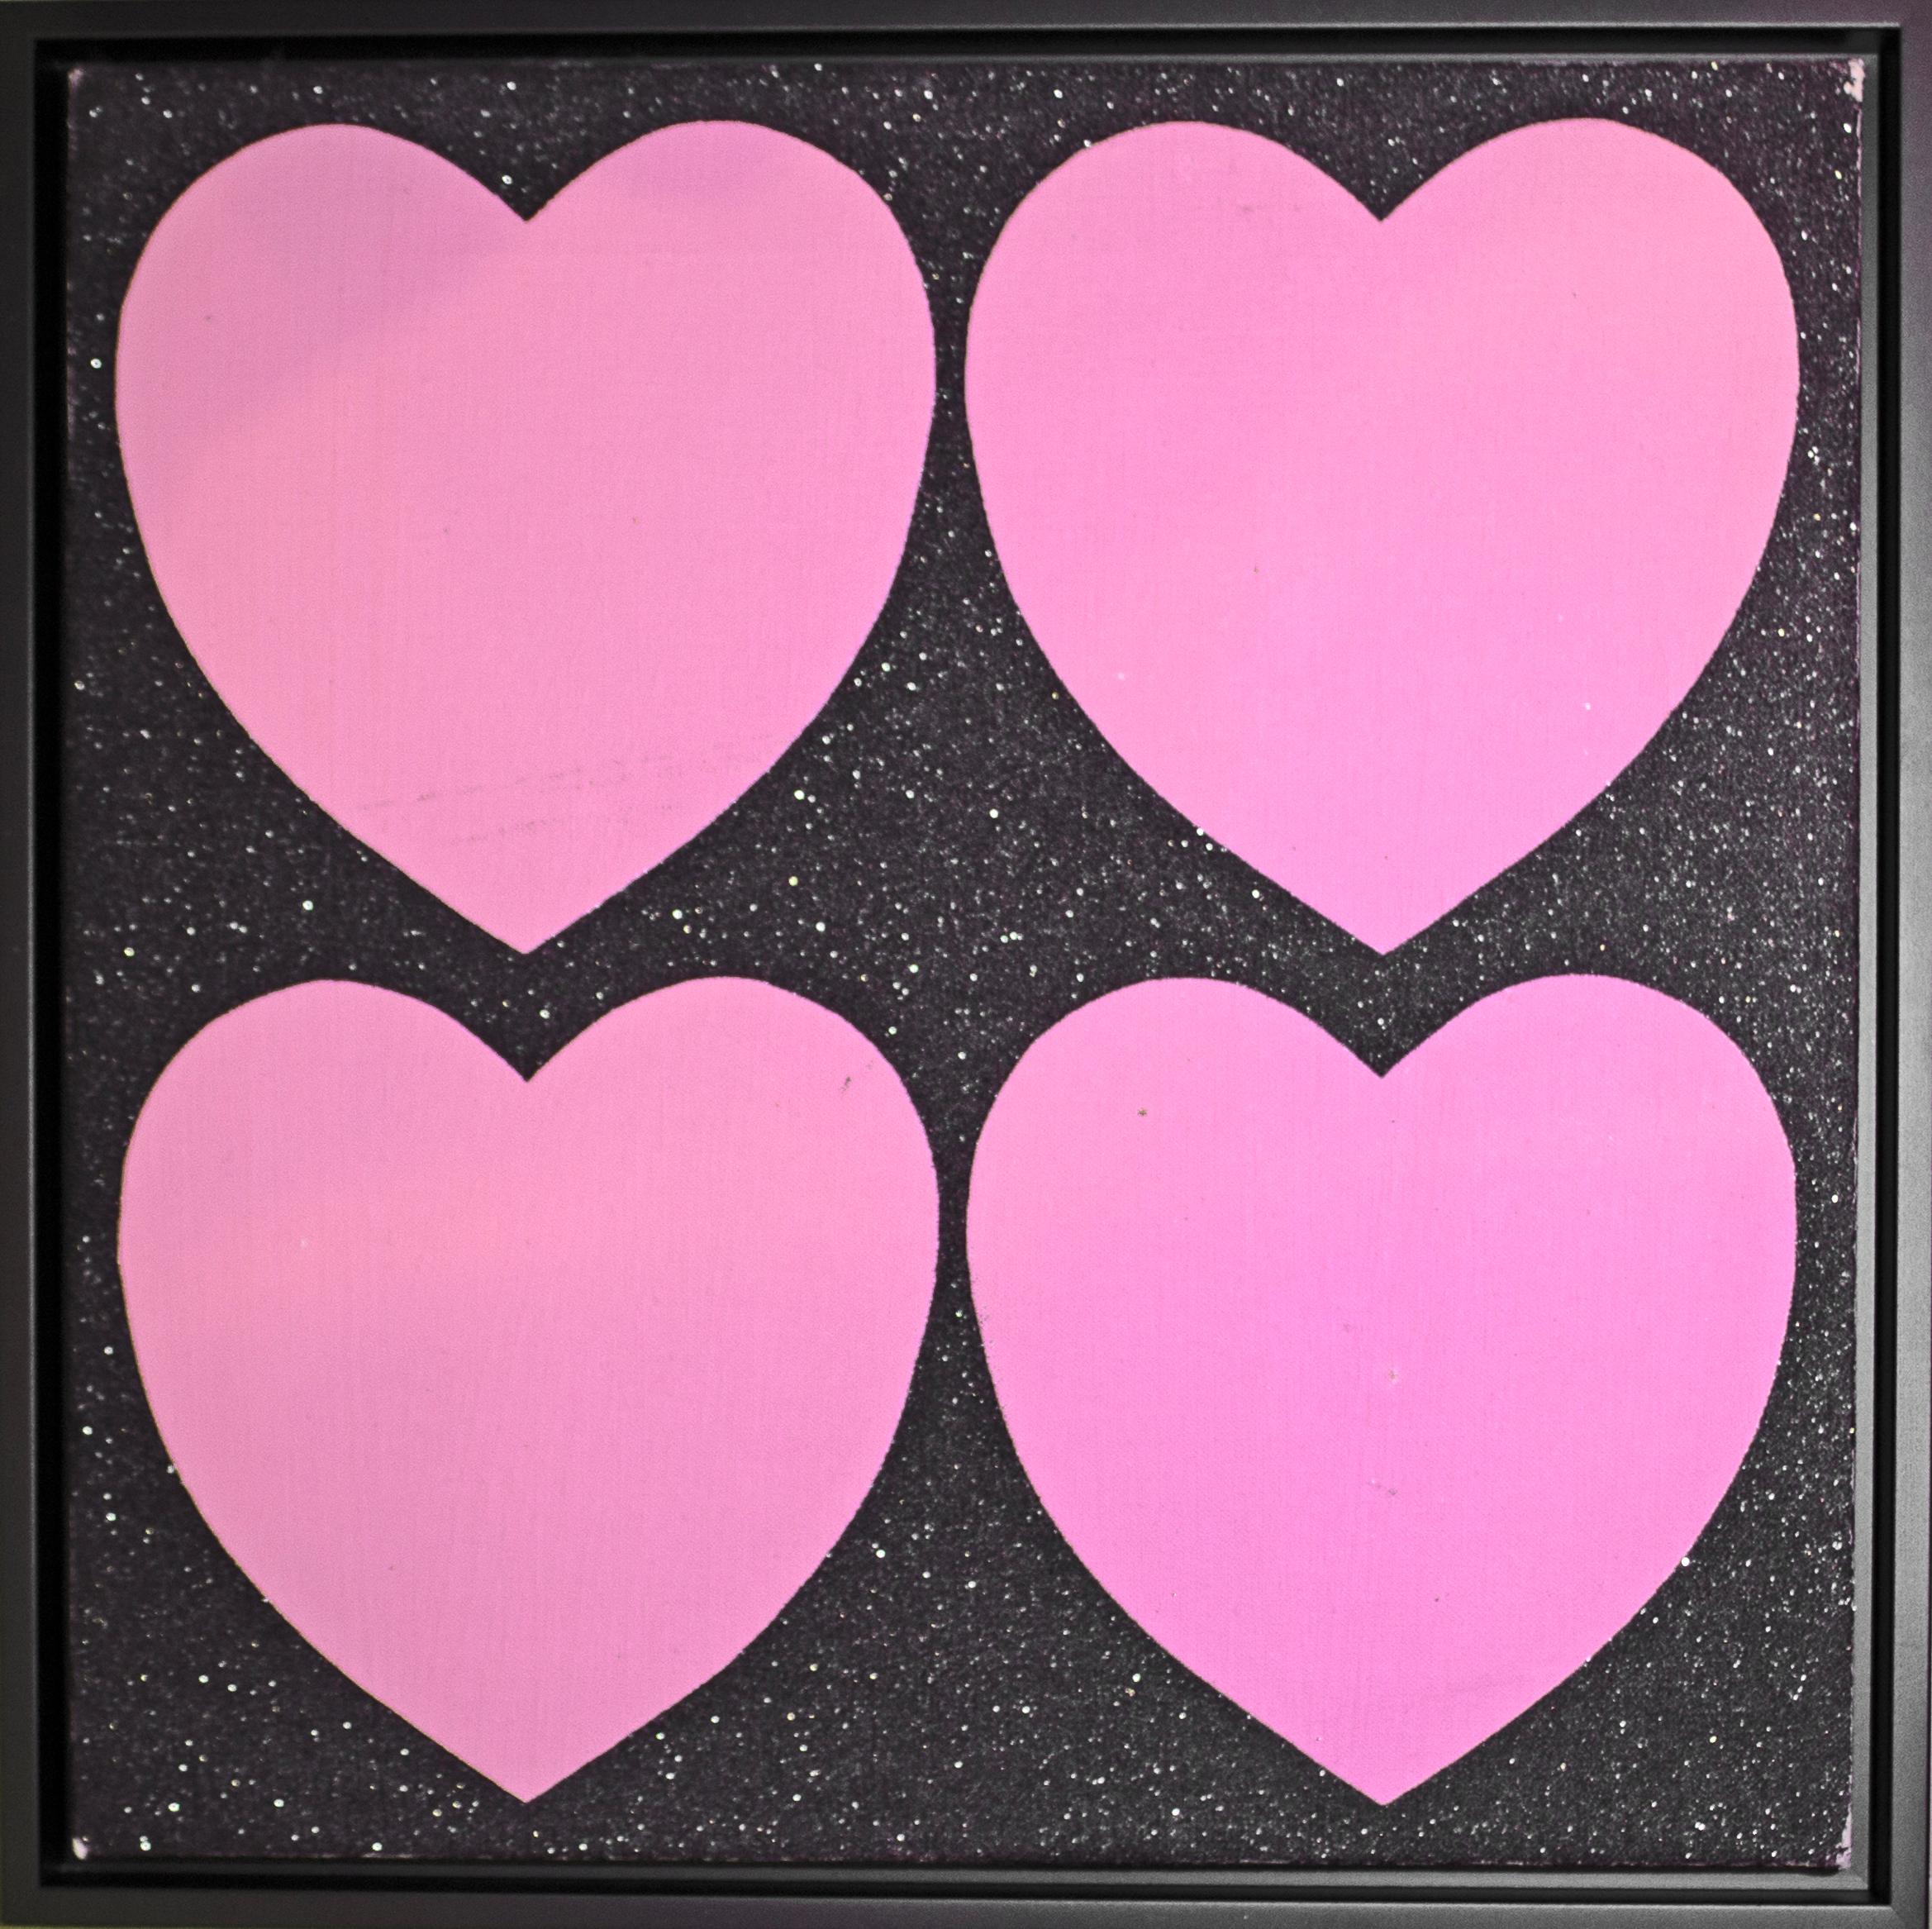 andy warhol heart painting